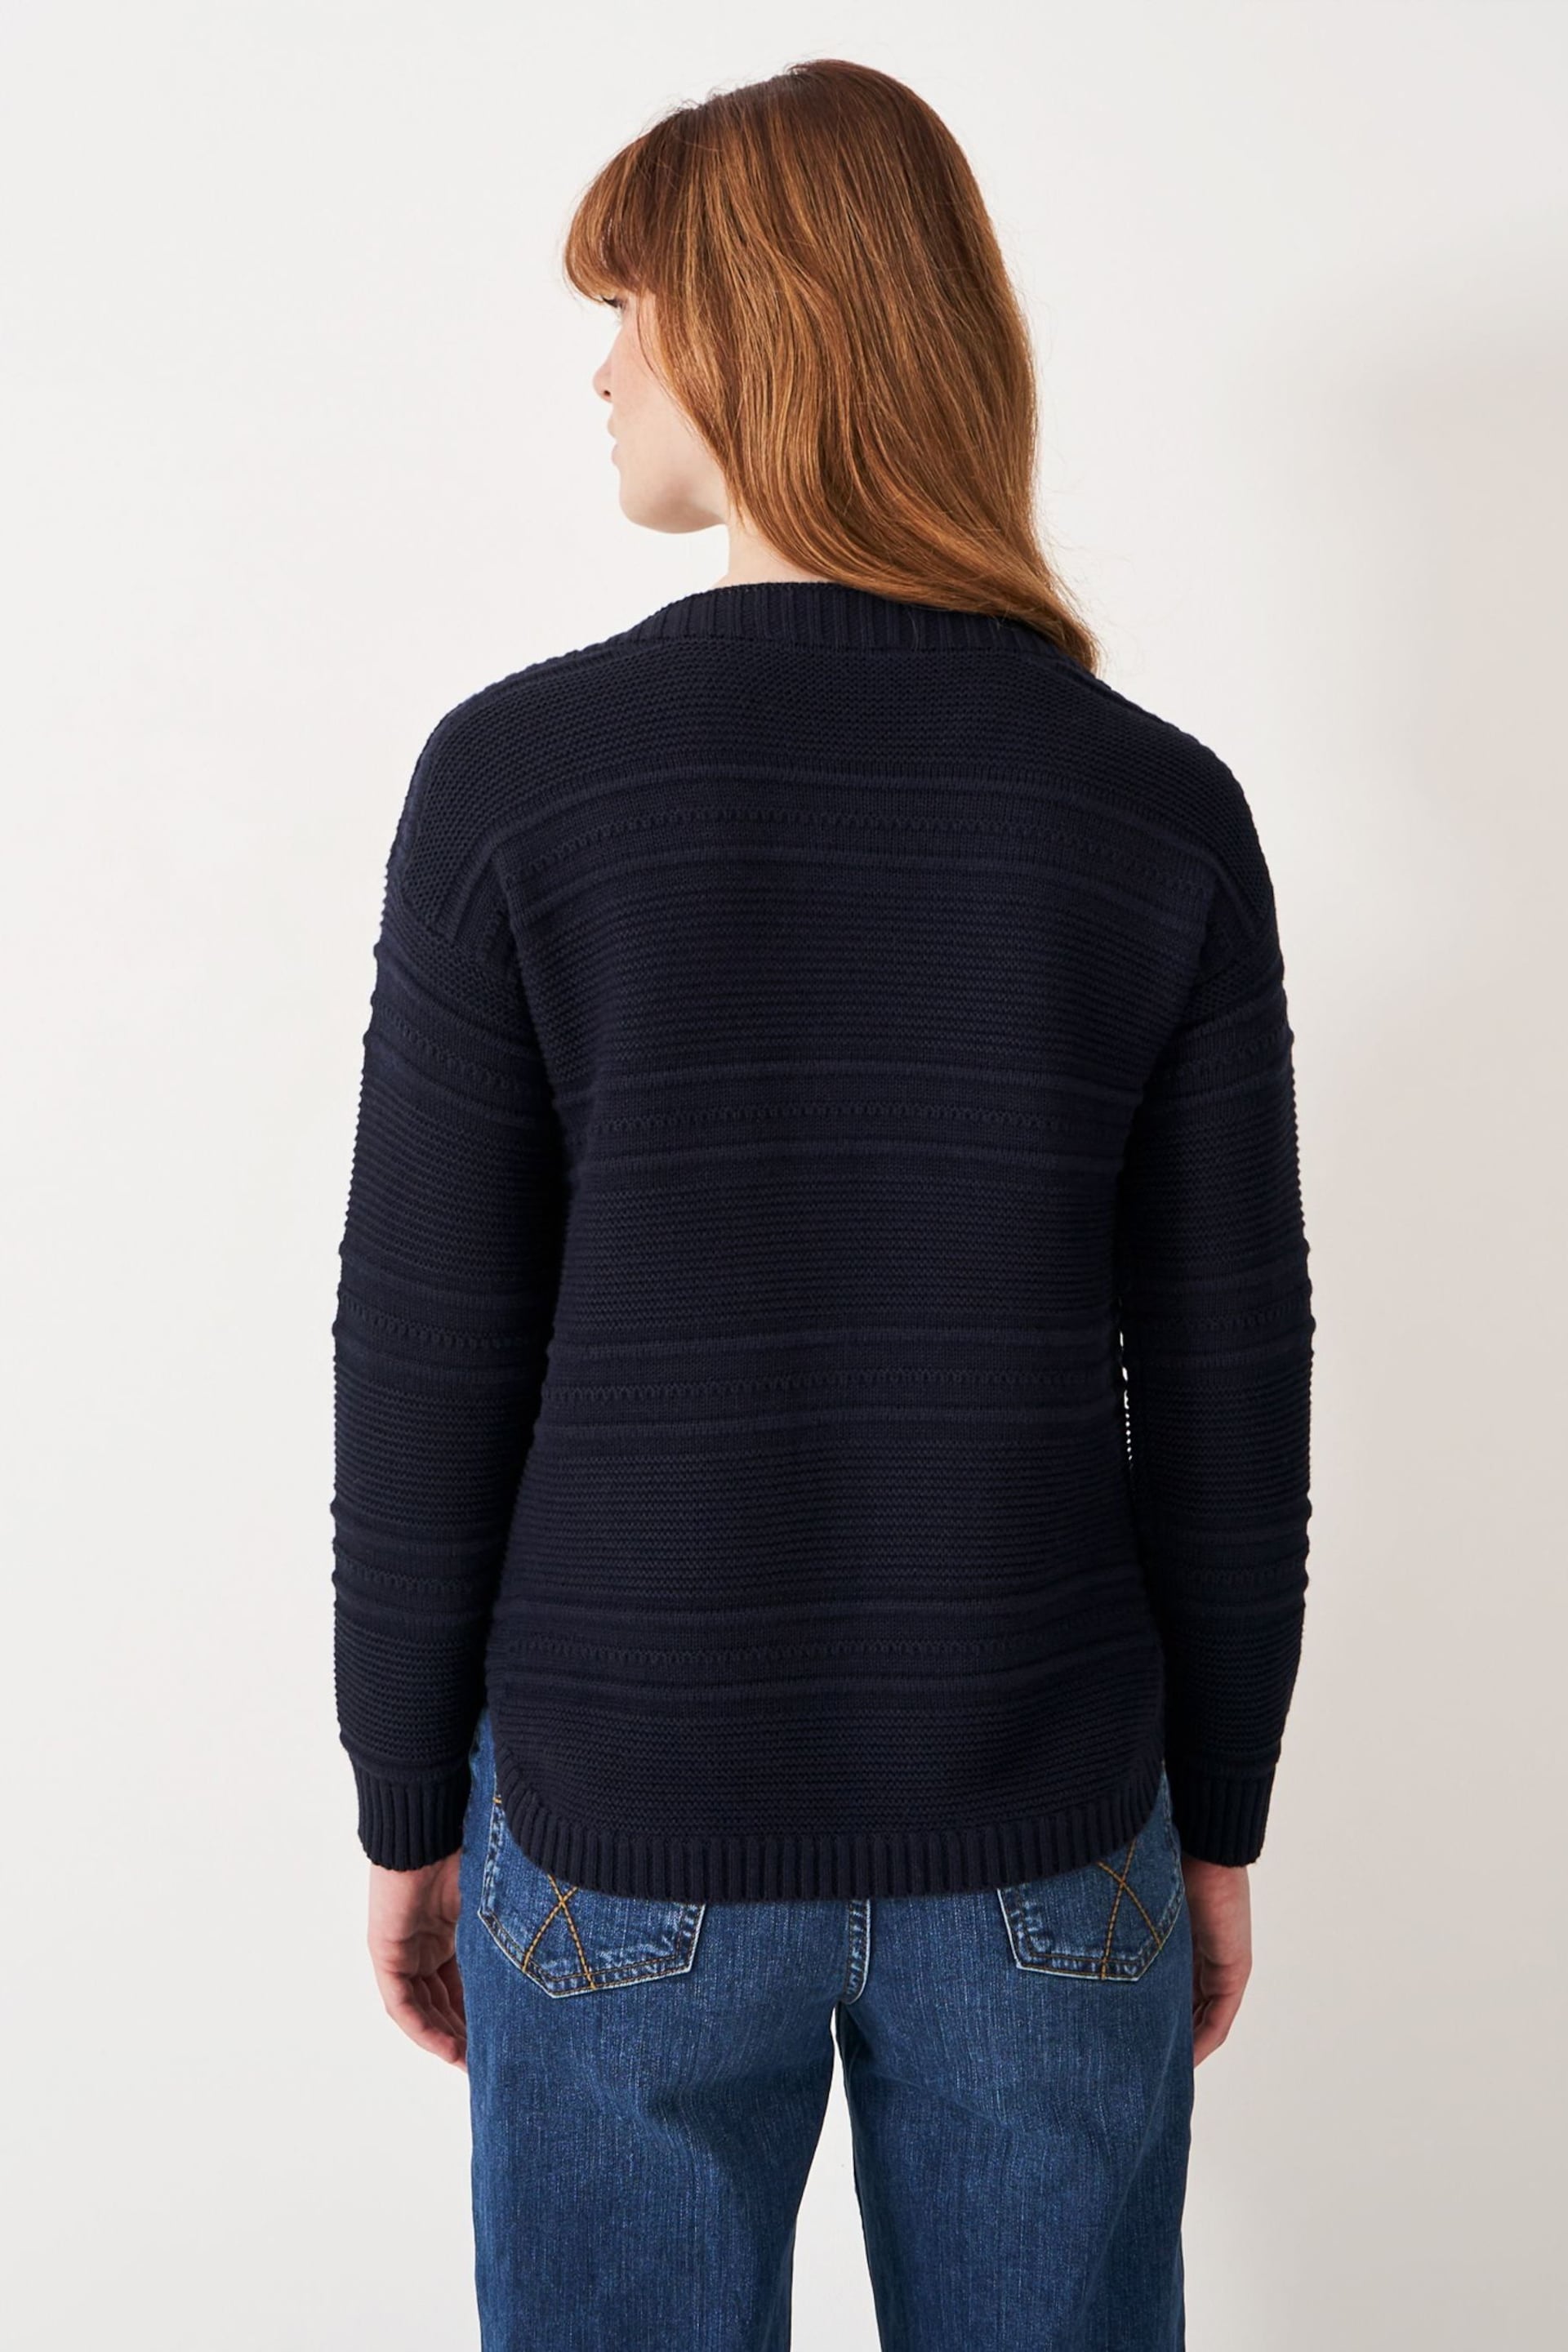 Crew Clothing Tali Knit Jumper - Image 2 of 6